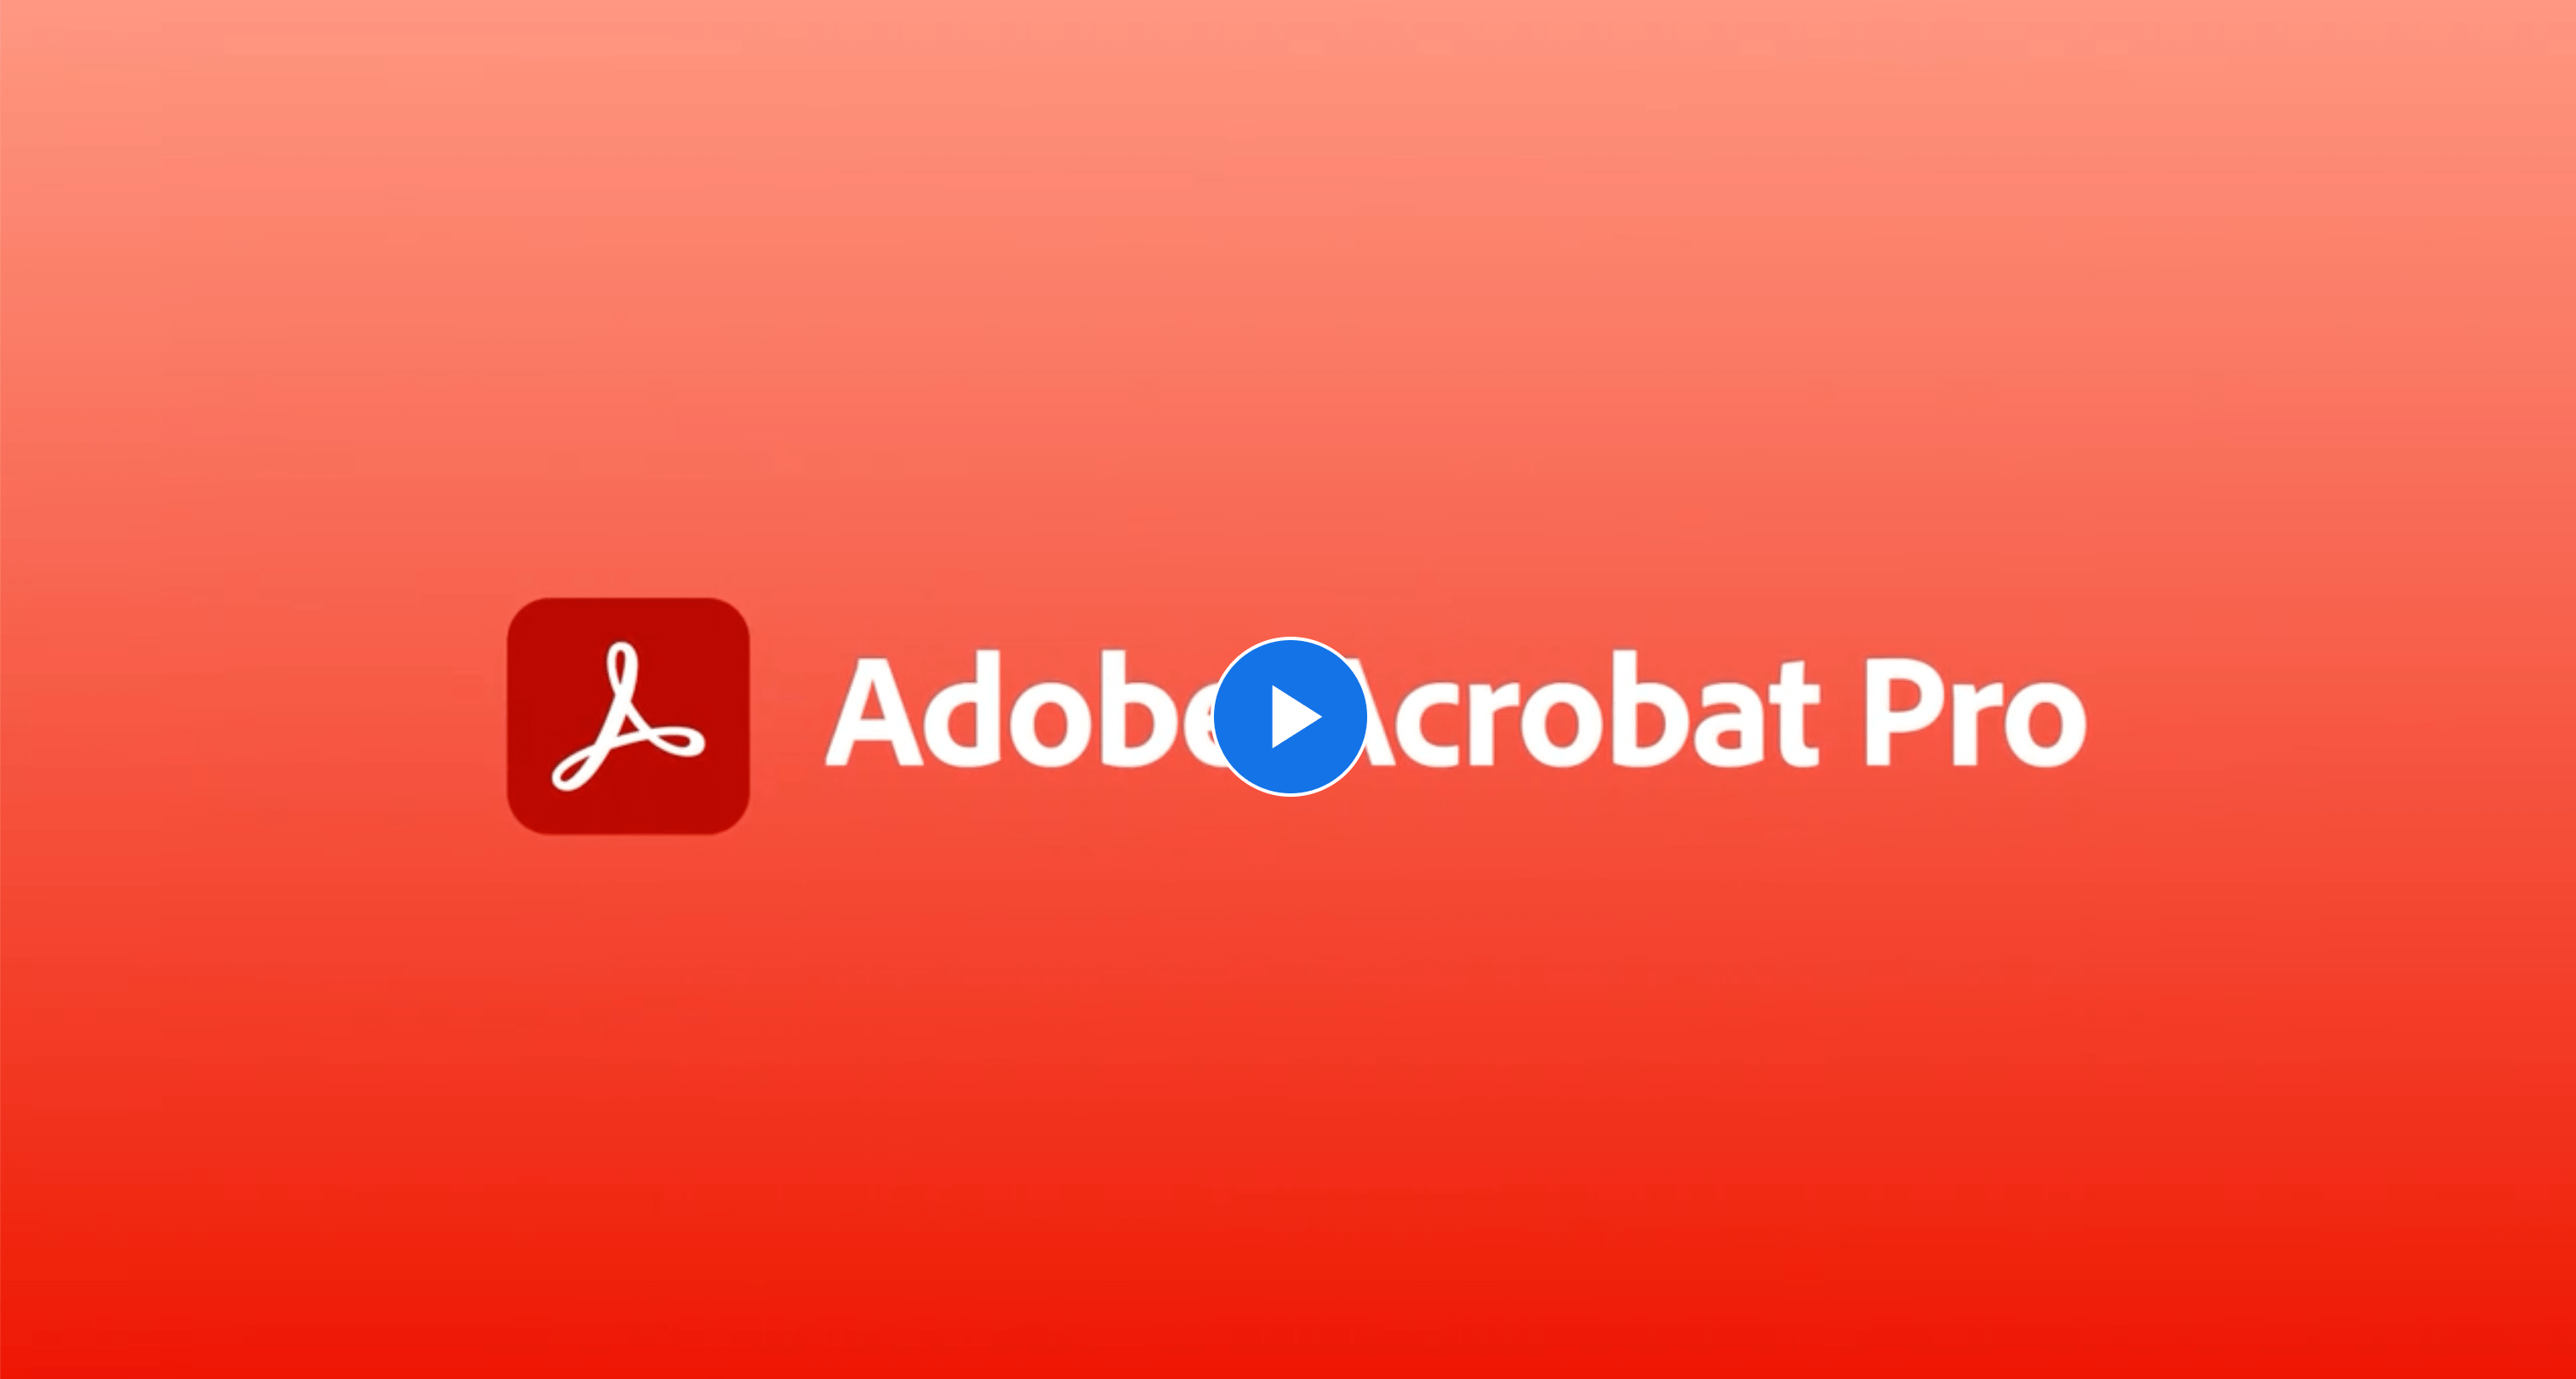 LandAcrobatAlexGay - Acrobat Pro: The all-in-one PDF and e-signature Solution for Modern Business / Alex Gay Video_UE